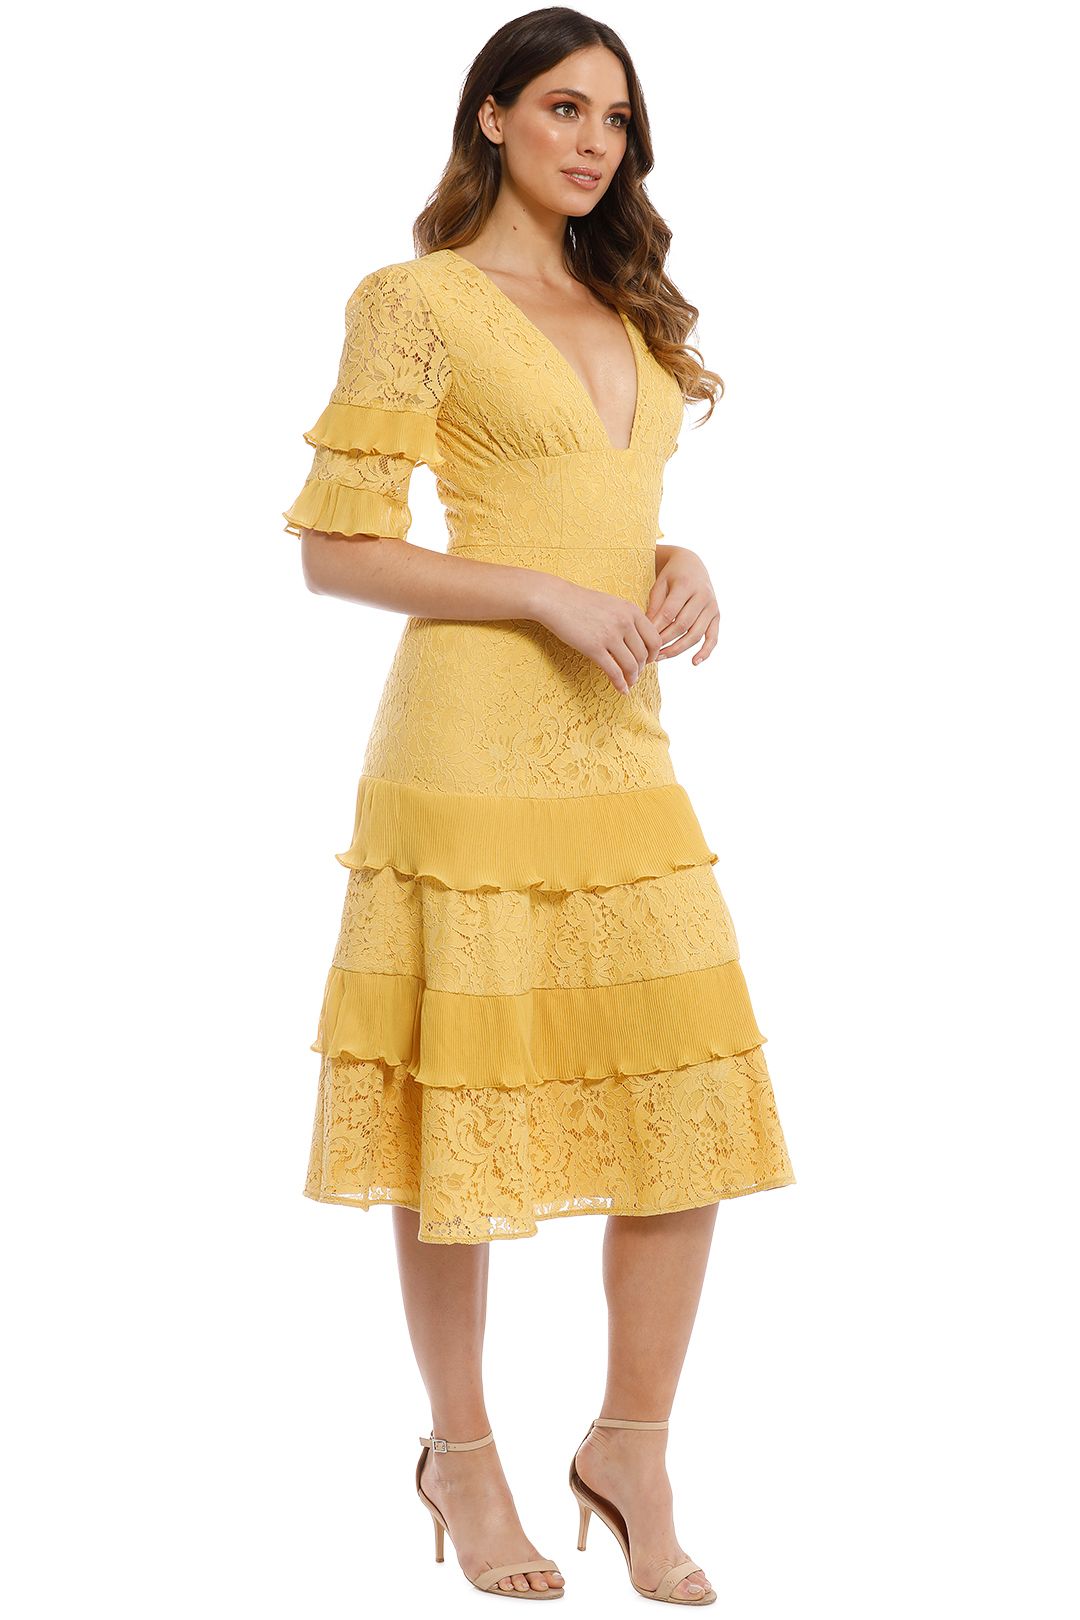 Timeless Lace Midi Dress in Golden Yellow by Keepsake the Label for Rent